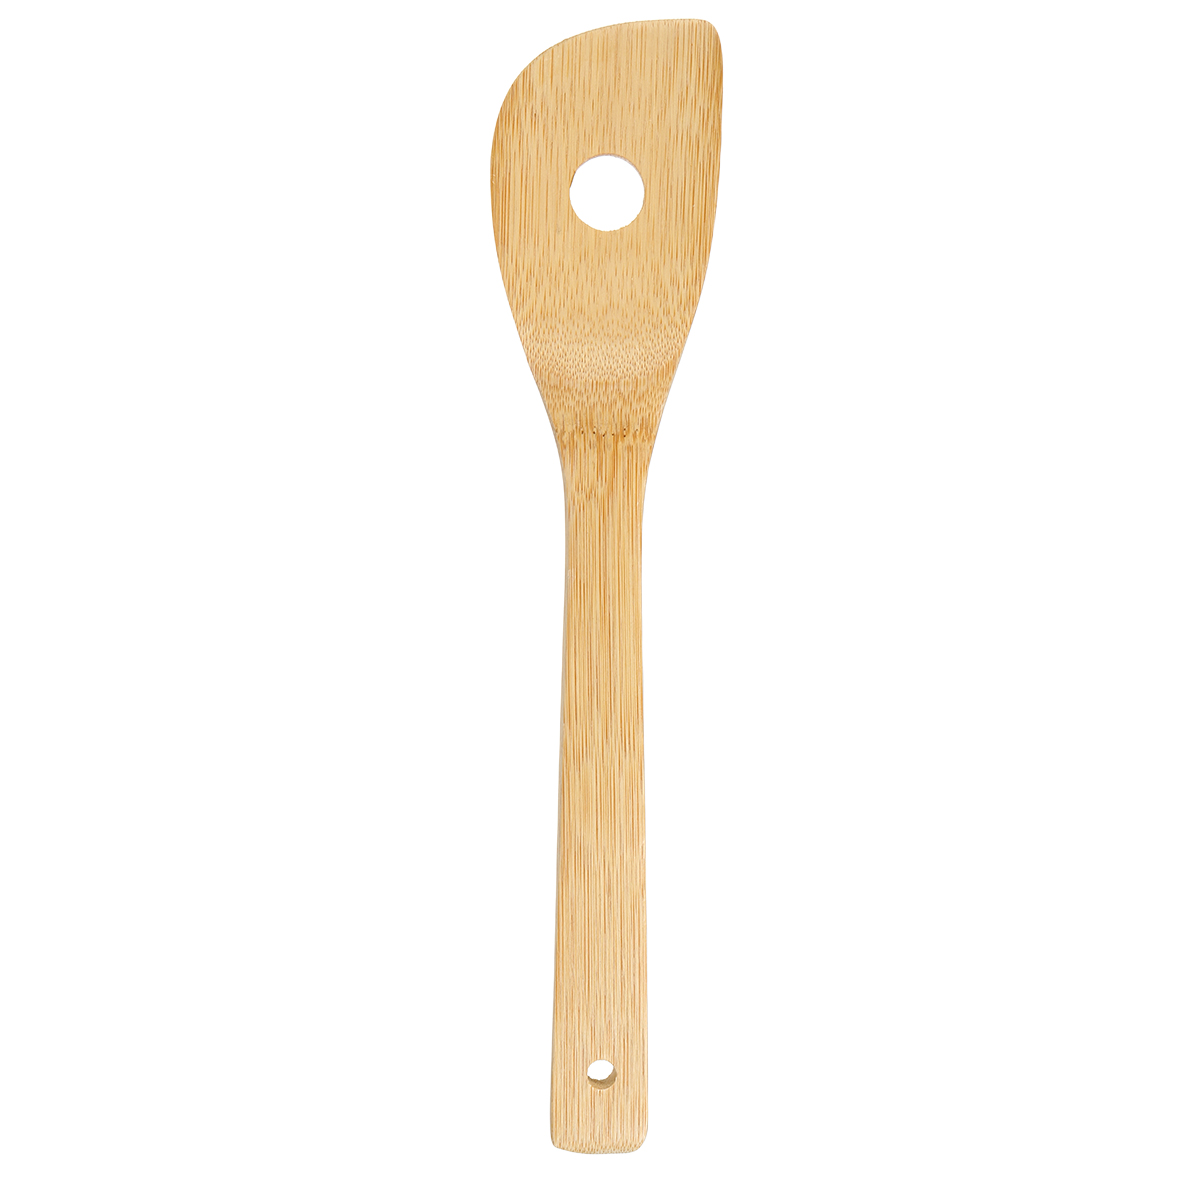 8PCS-Bamboo-Nonstick-Cooking-Utensils-Wooden-Spoons-and-Spatula-Utensil-Set-1680404-8